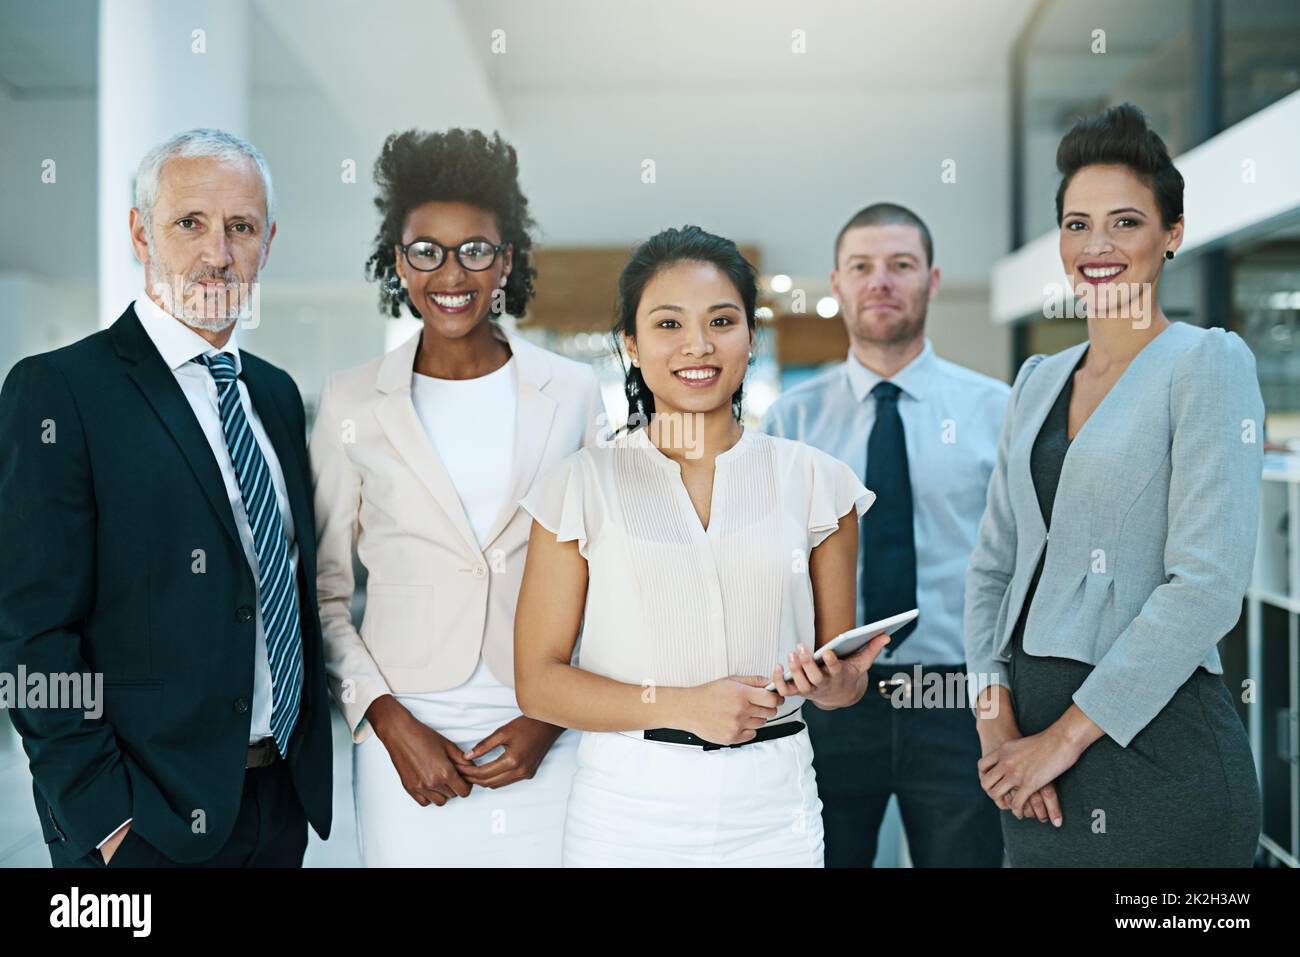 Theyre led by a confident, charismatic leader. Portrait of a group of businesspeople standing together. Stock Photo